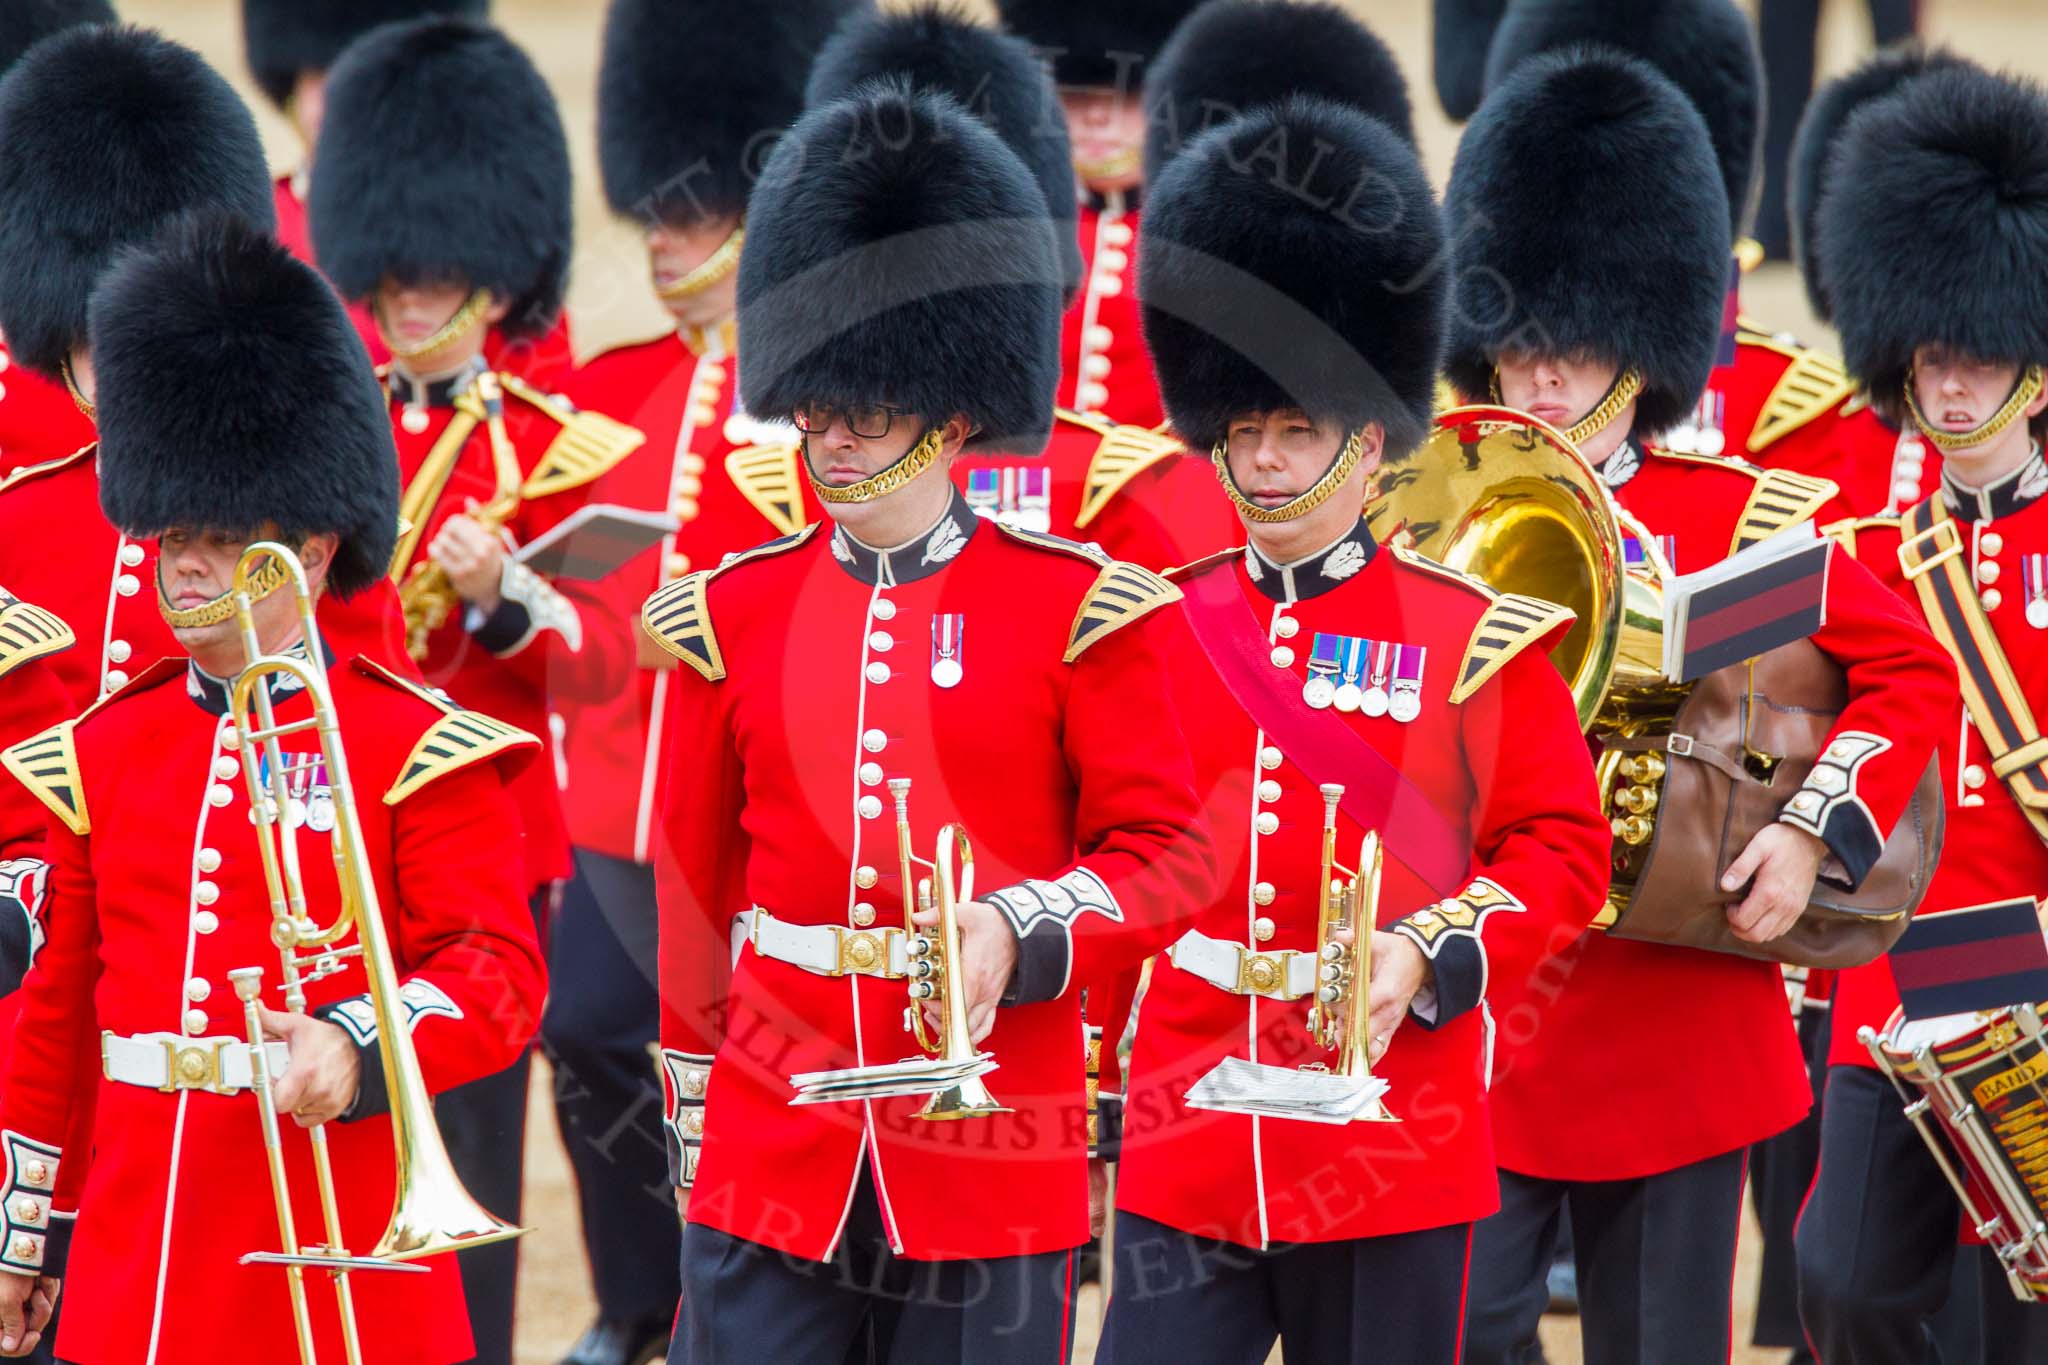 Trooping the Colour 2014.
Horse Guards Parade, Westminster,
London SW1A,

United Kingdom,
on 14 June 2014 at 10:25, image #140